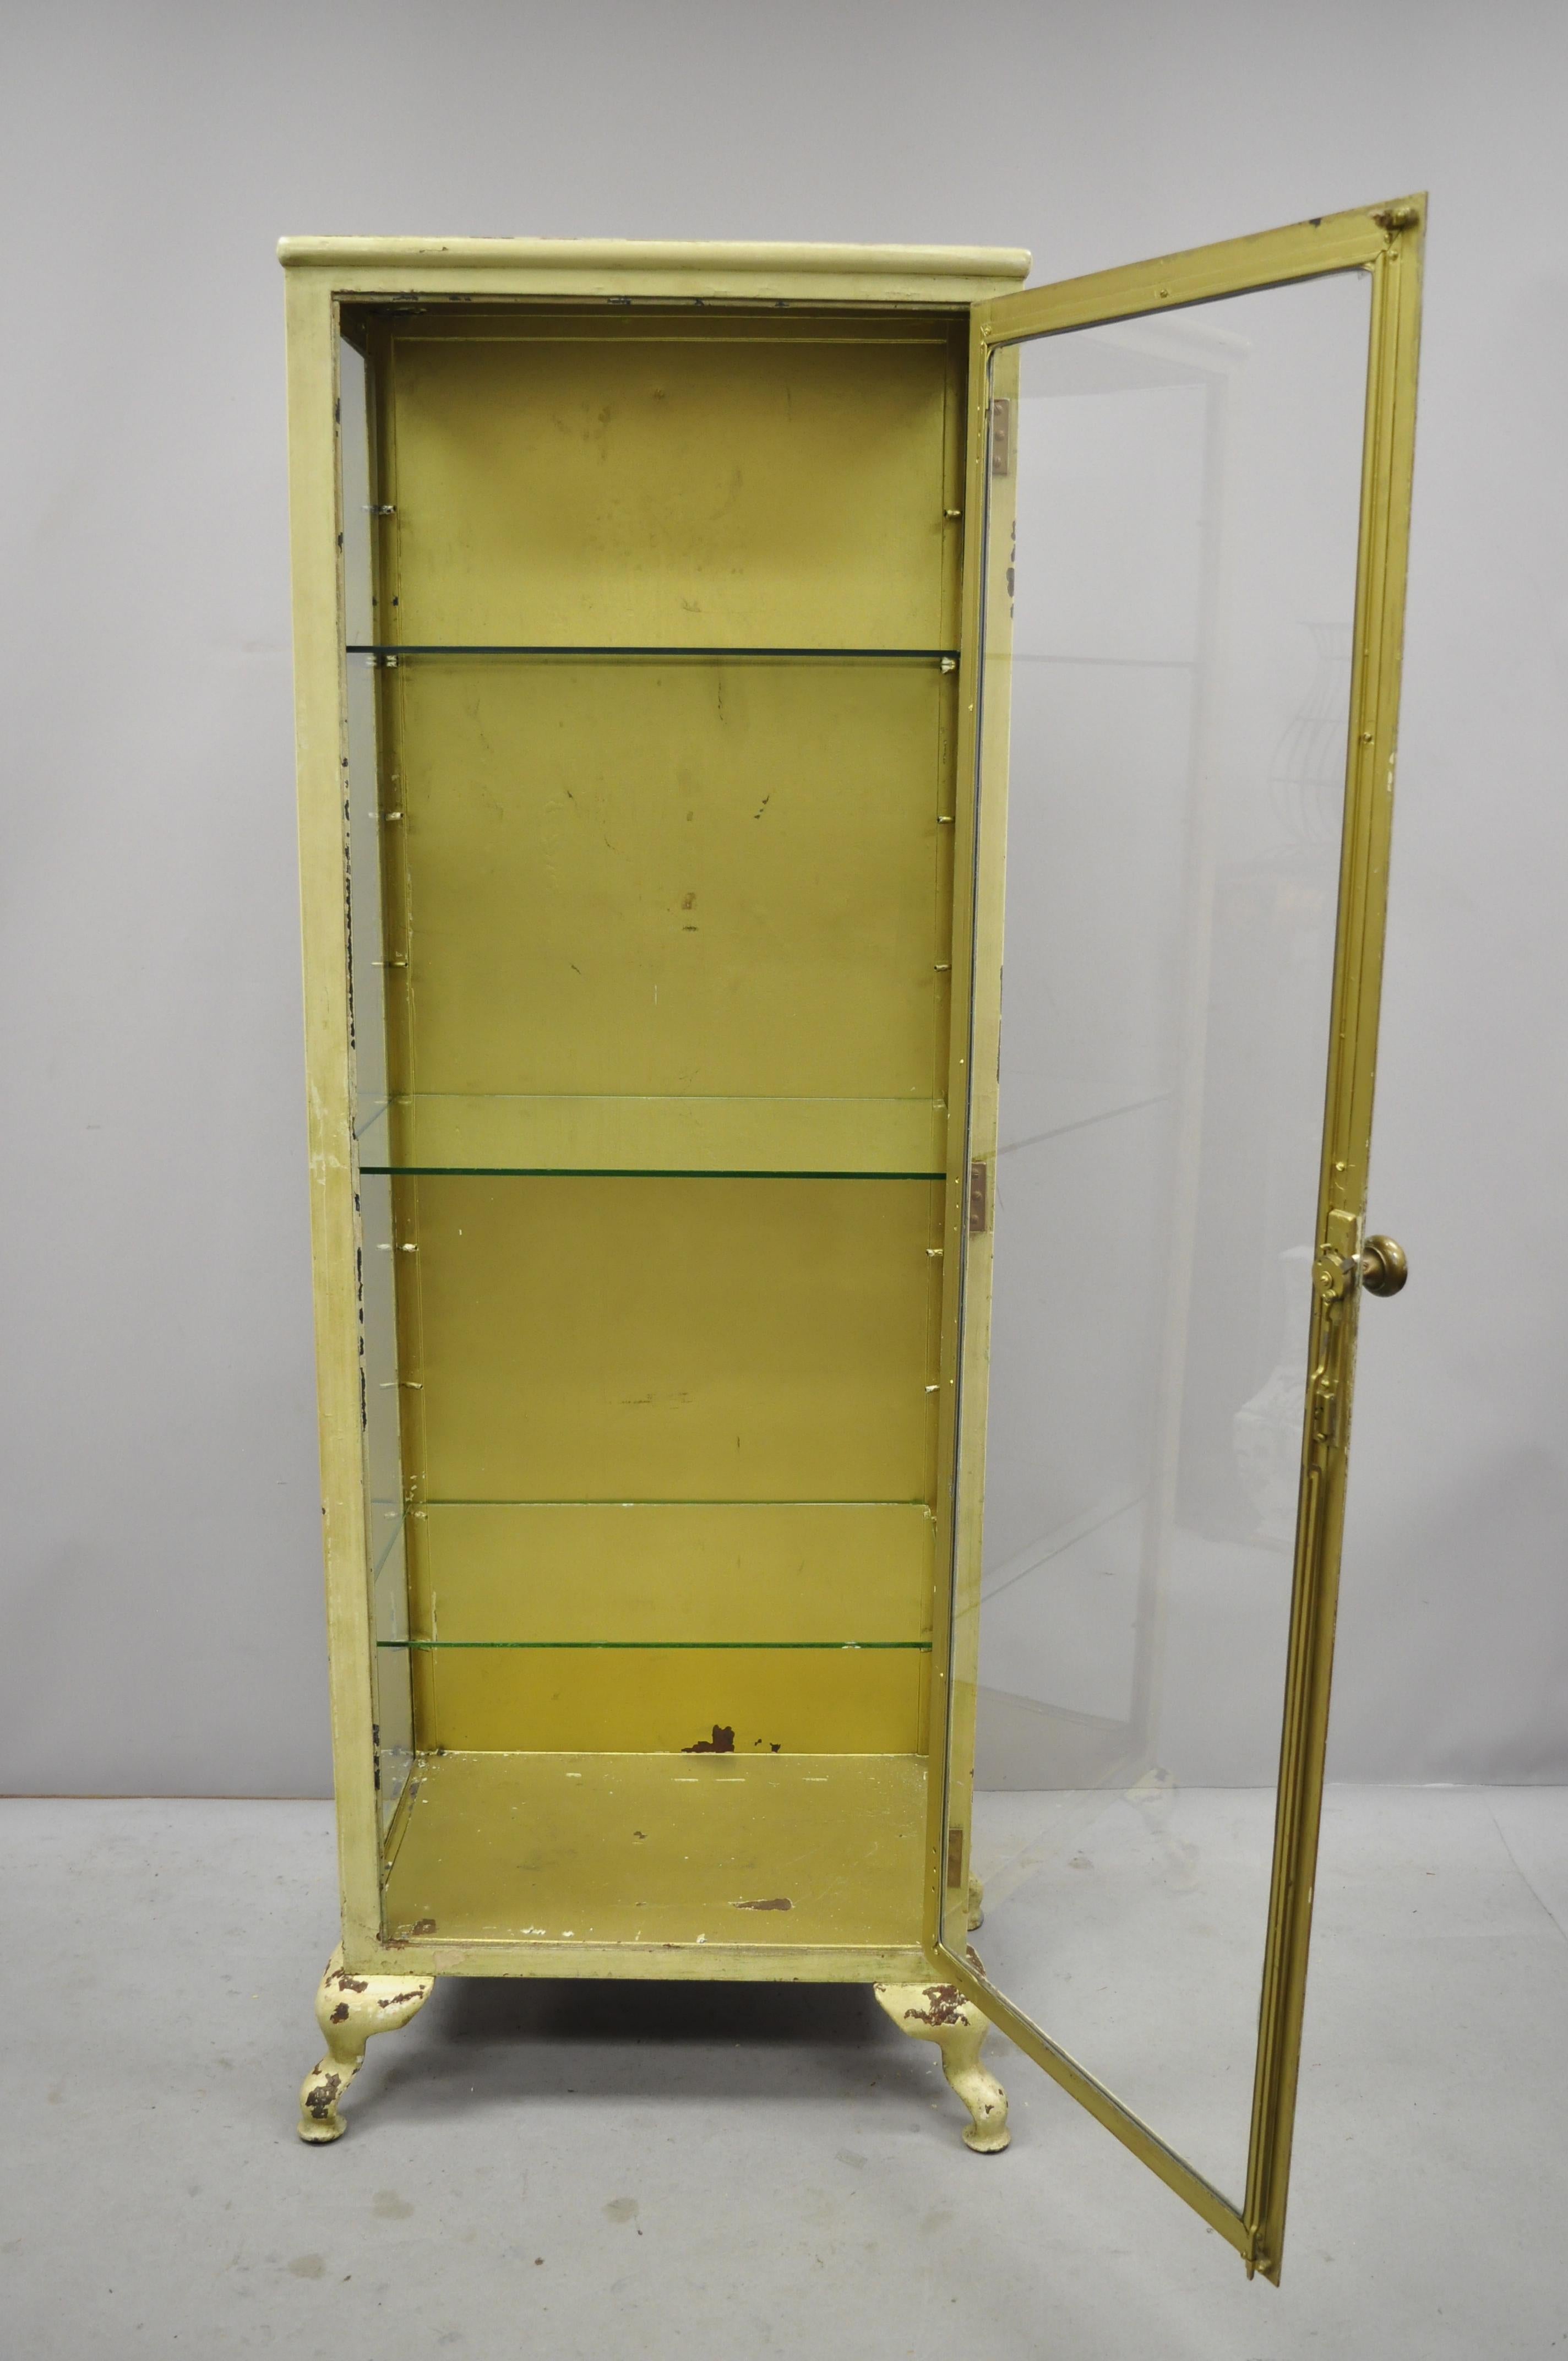 Antique industrial steel metal and glass medical storage dental tall bathroom cabinet. Item includes a glass front and sides, steel metal frame, 2 part construction, no key, but unlocked, 3 adjustable glass shelves, quality American craftsmanship.